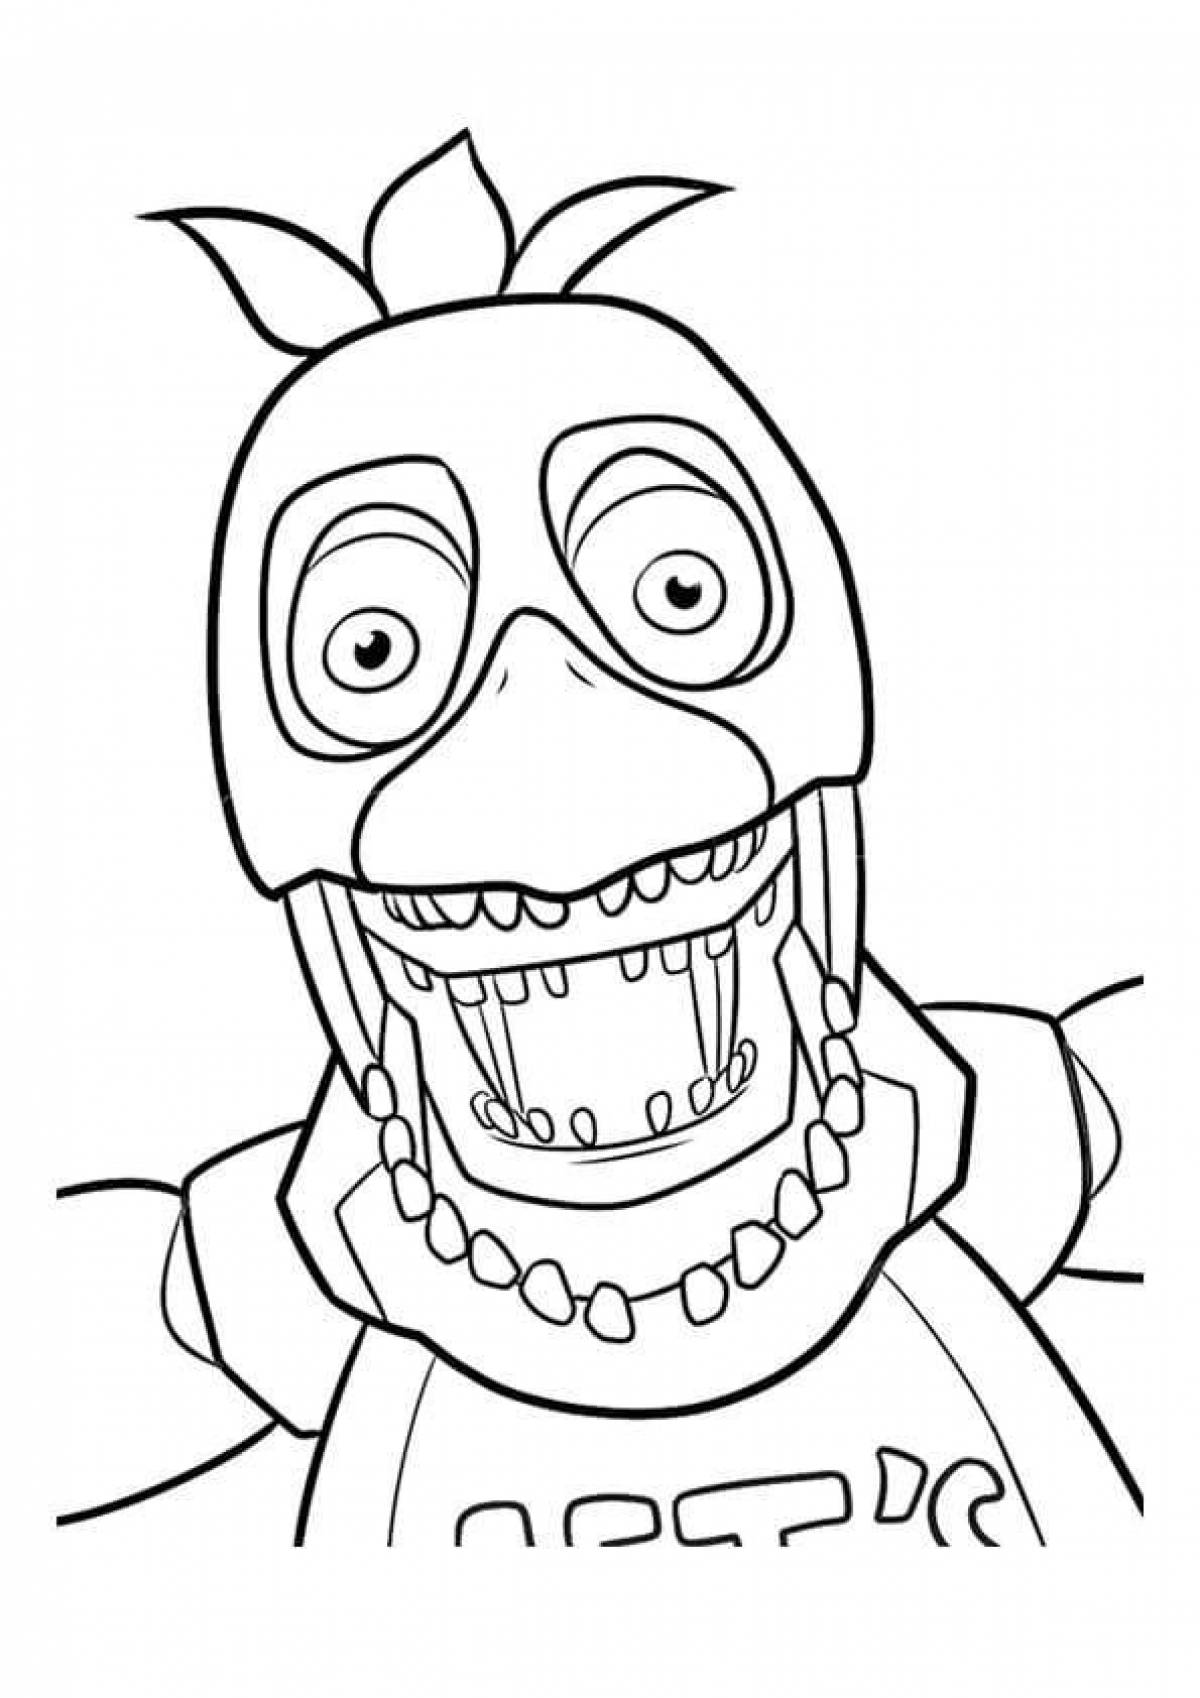 Chica's beautiful animatronic coloring book